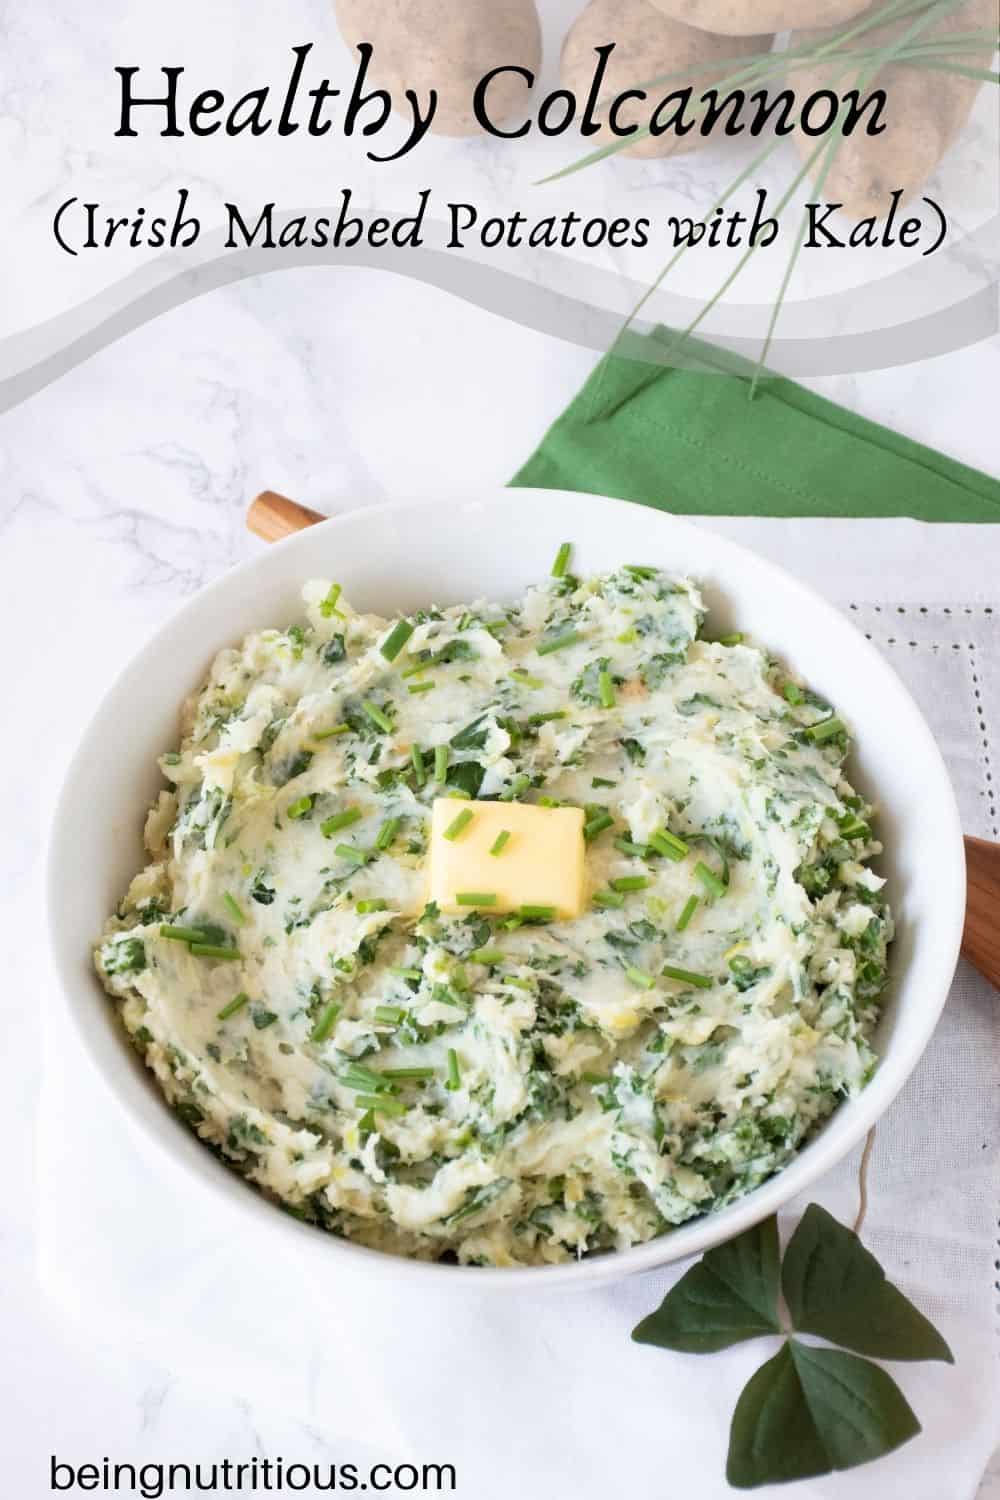 Bowl of mashed potatoes with a pat of butter on top. Text overlay: Healthy Colcannon (Irish mashed potatoes with kale).